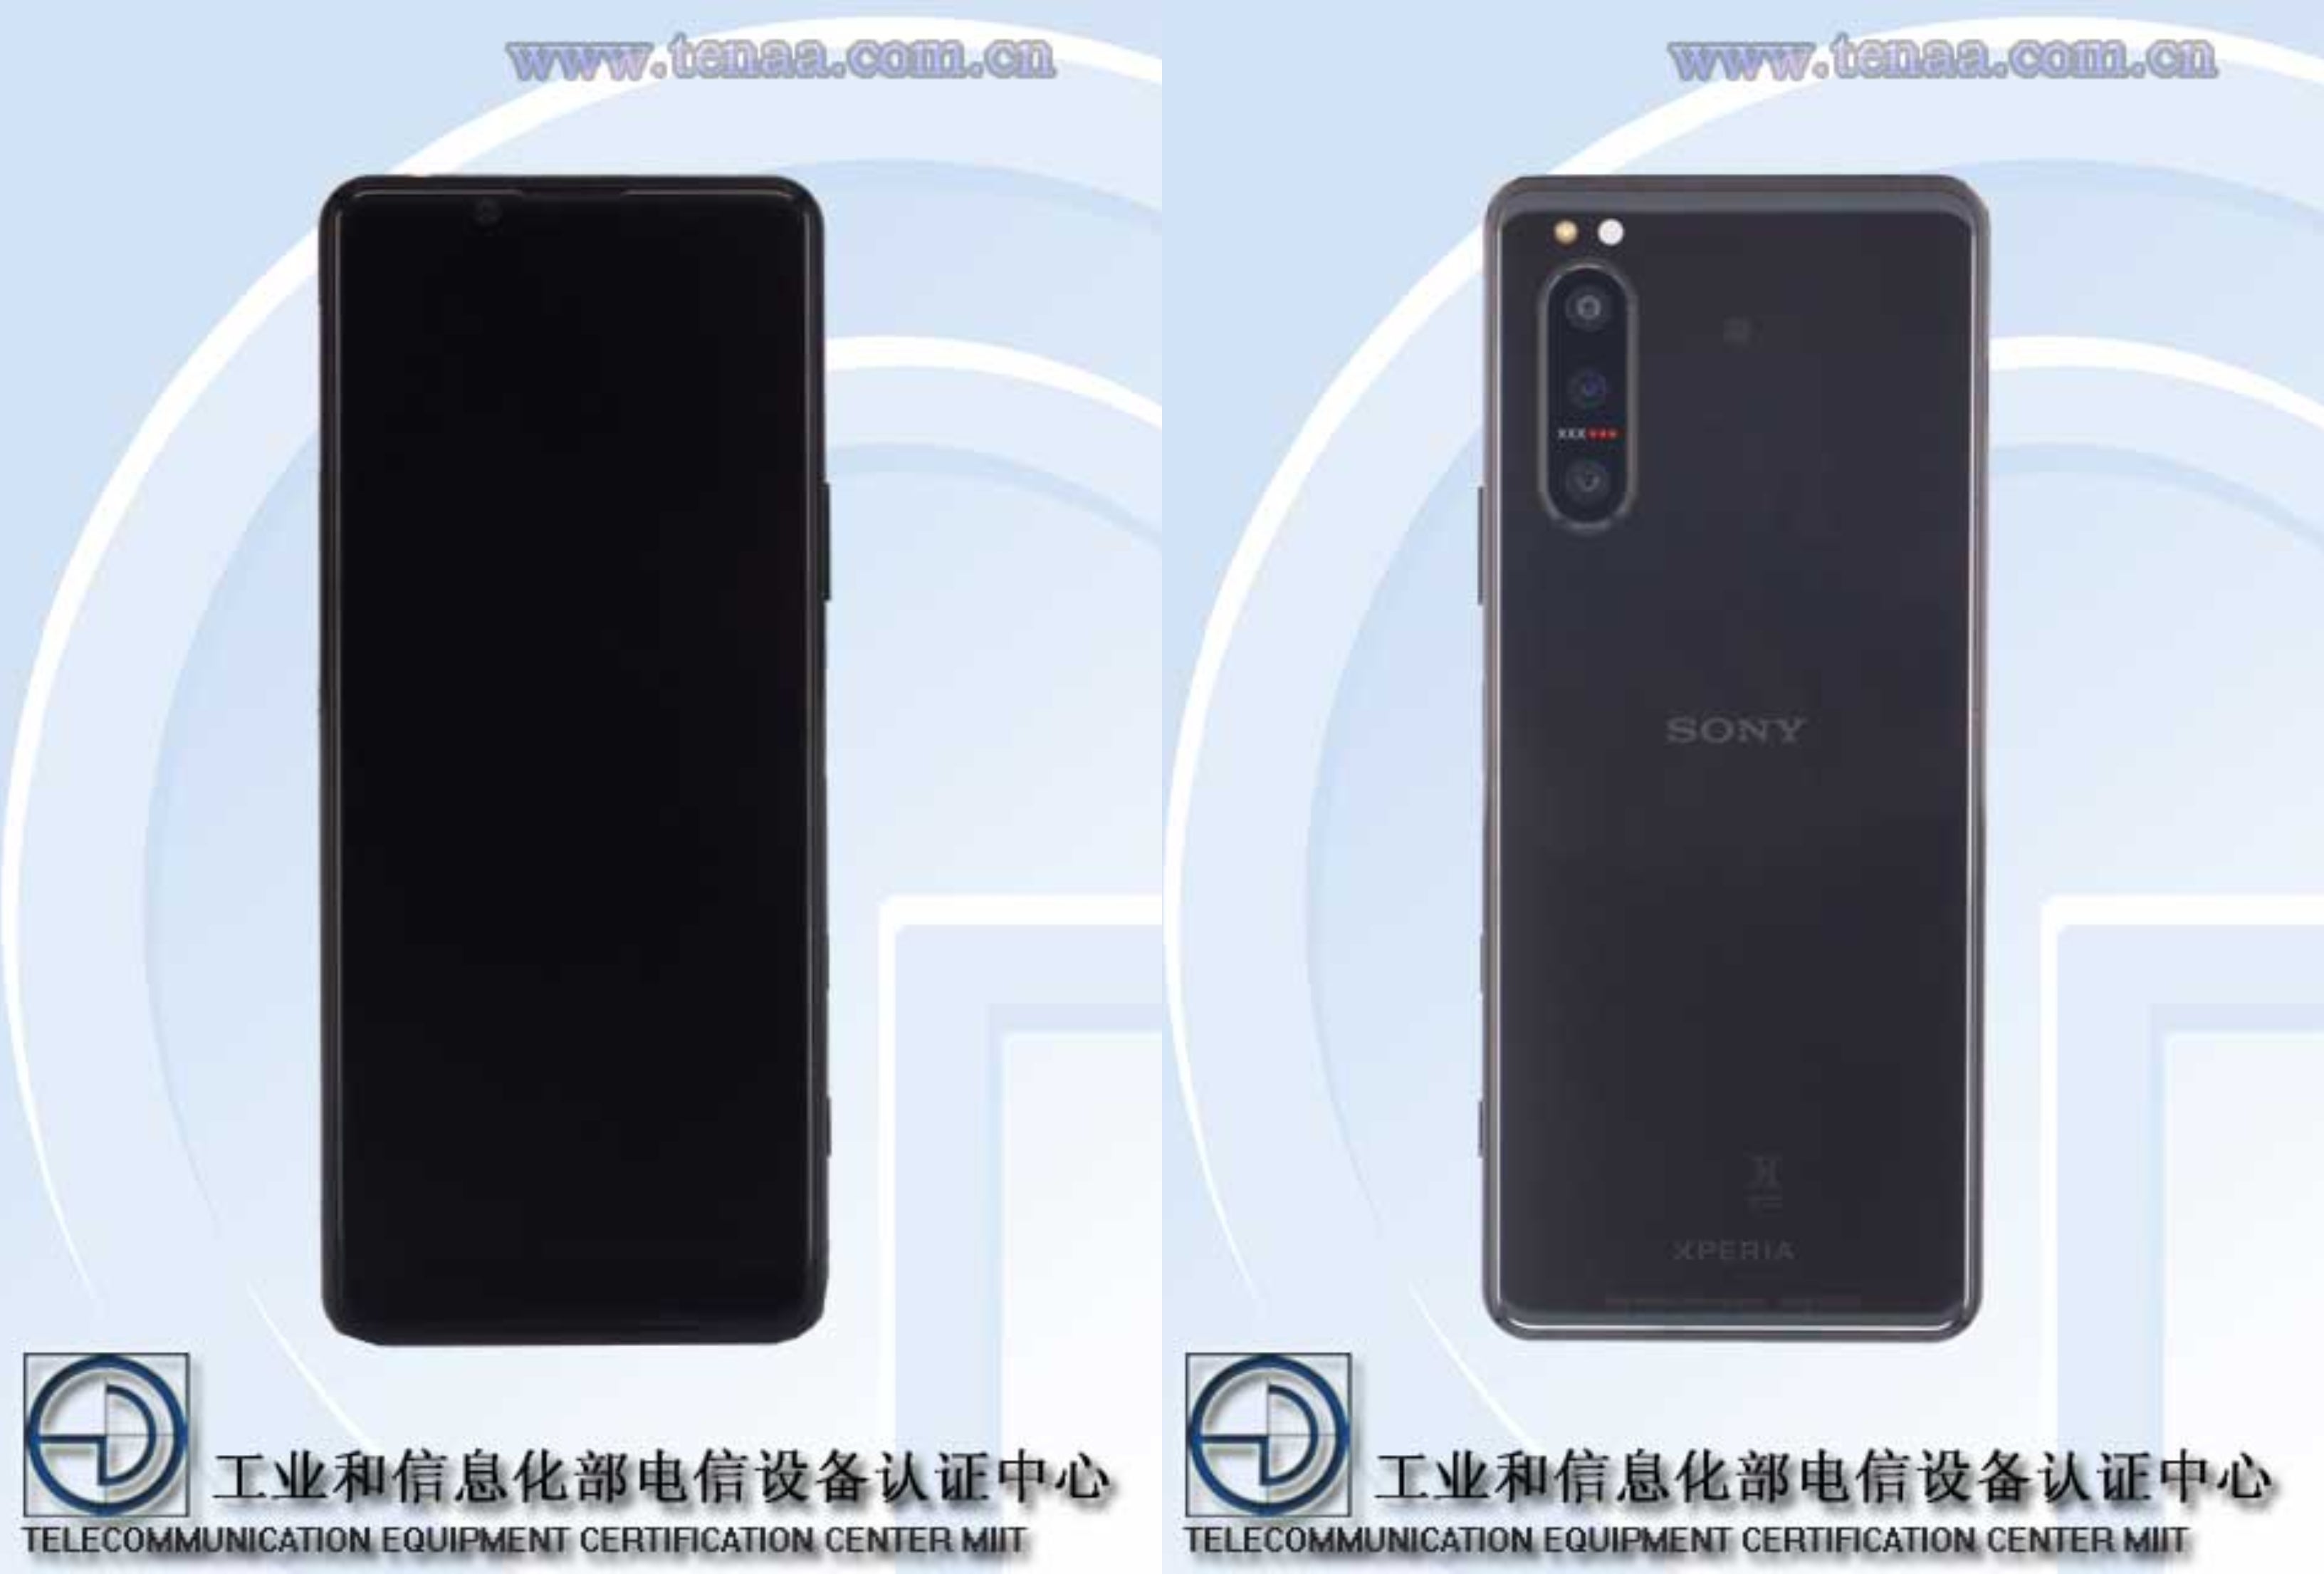 Sony's Xperia 5 II passes TENAA certification, confirming sleek design and 5G support